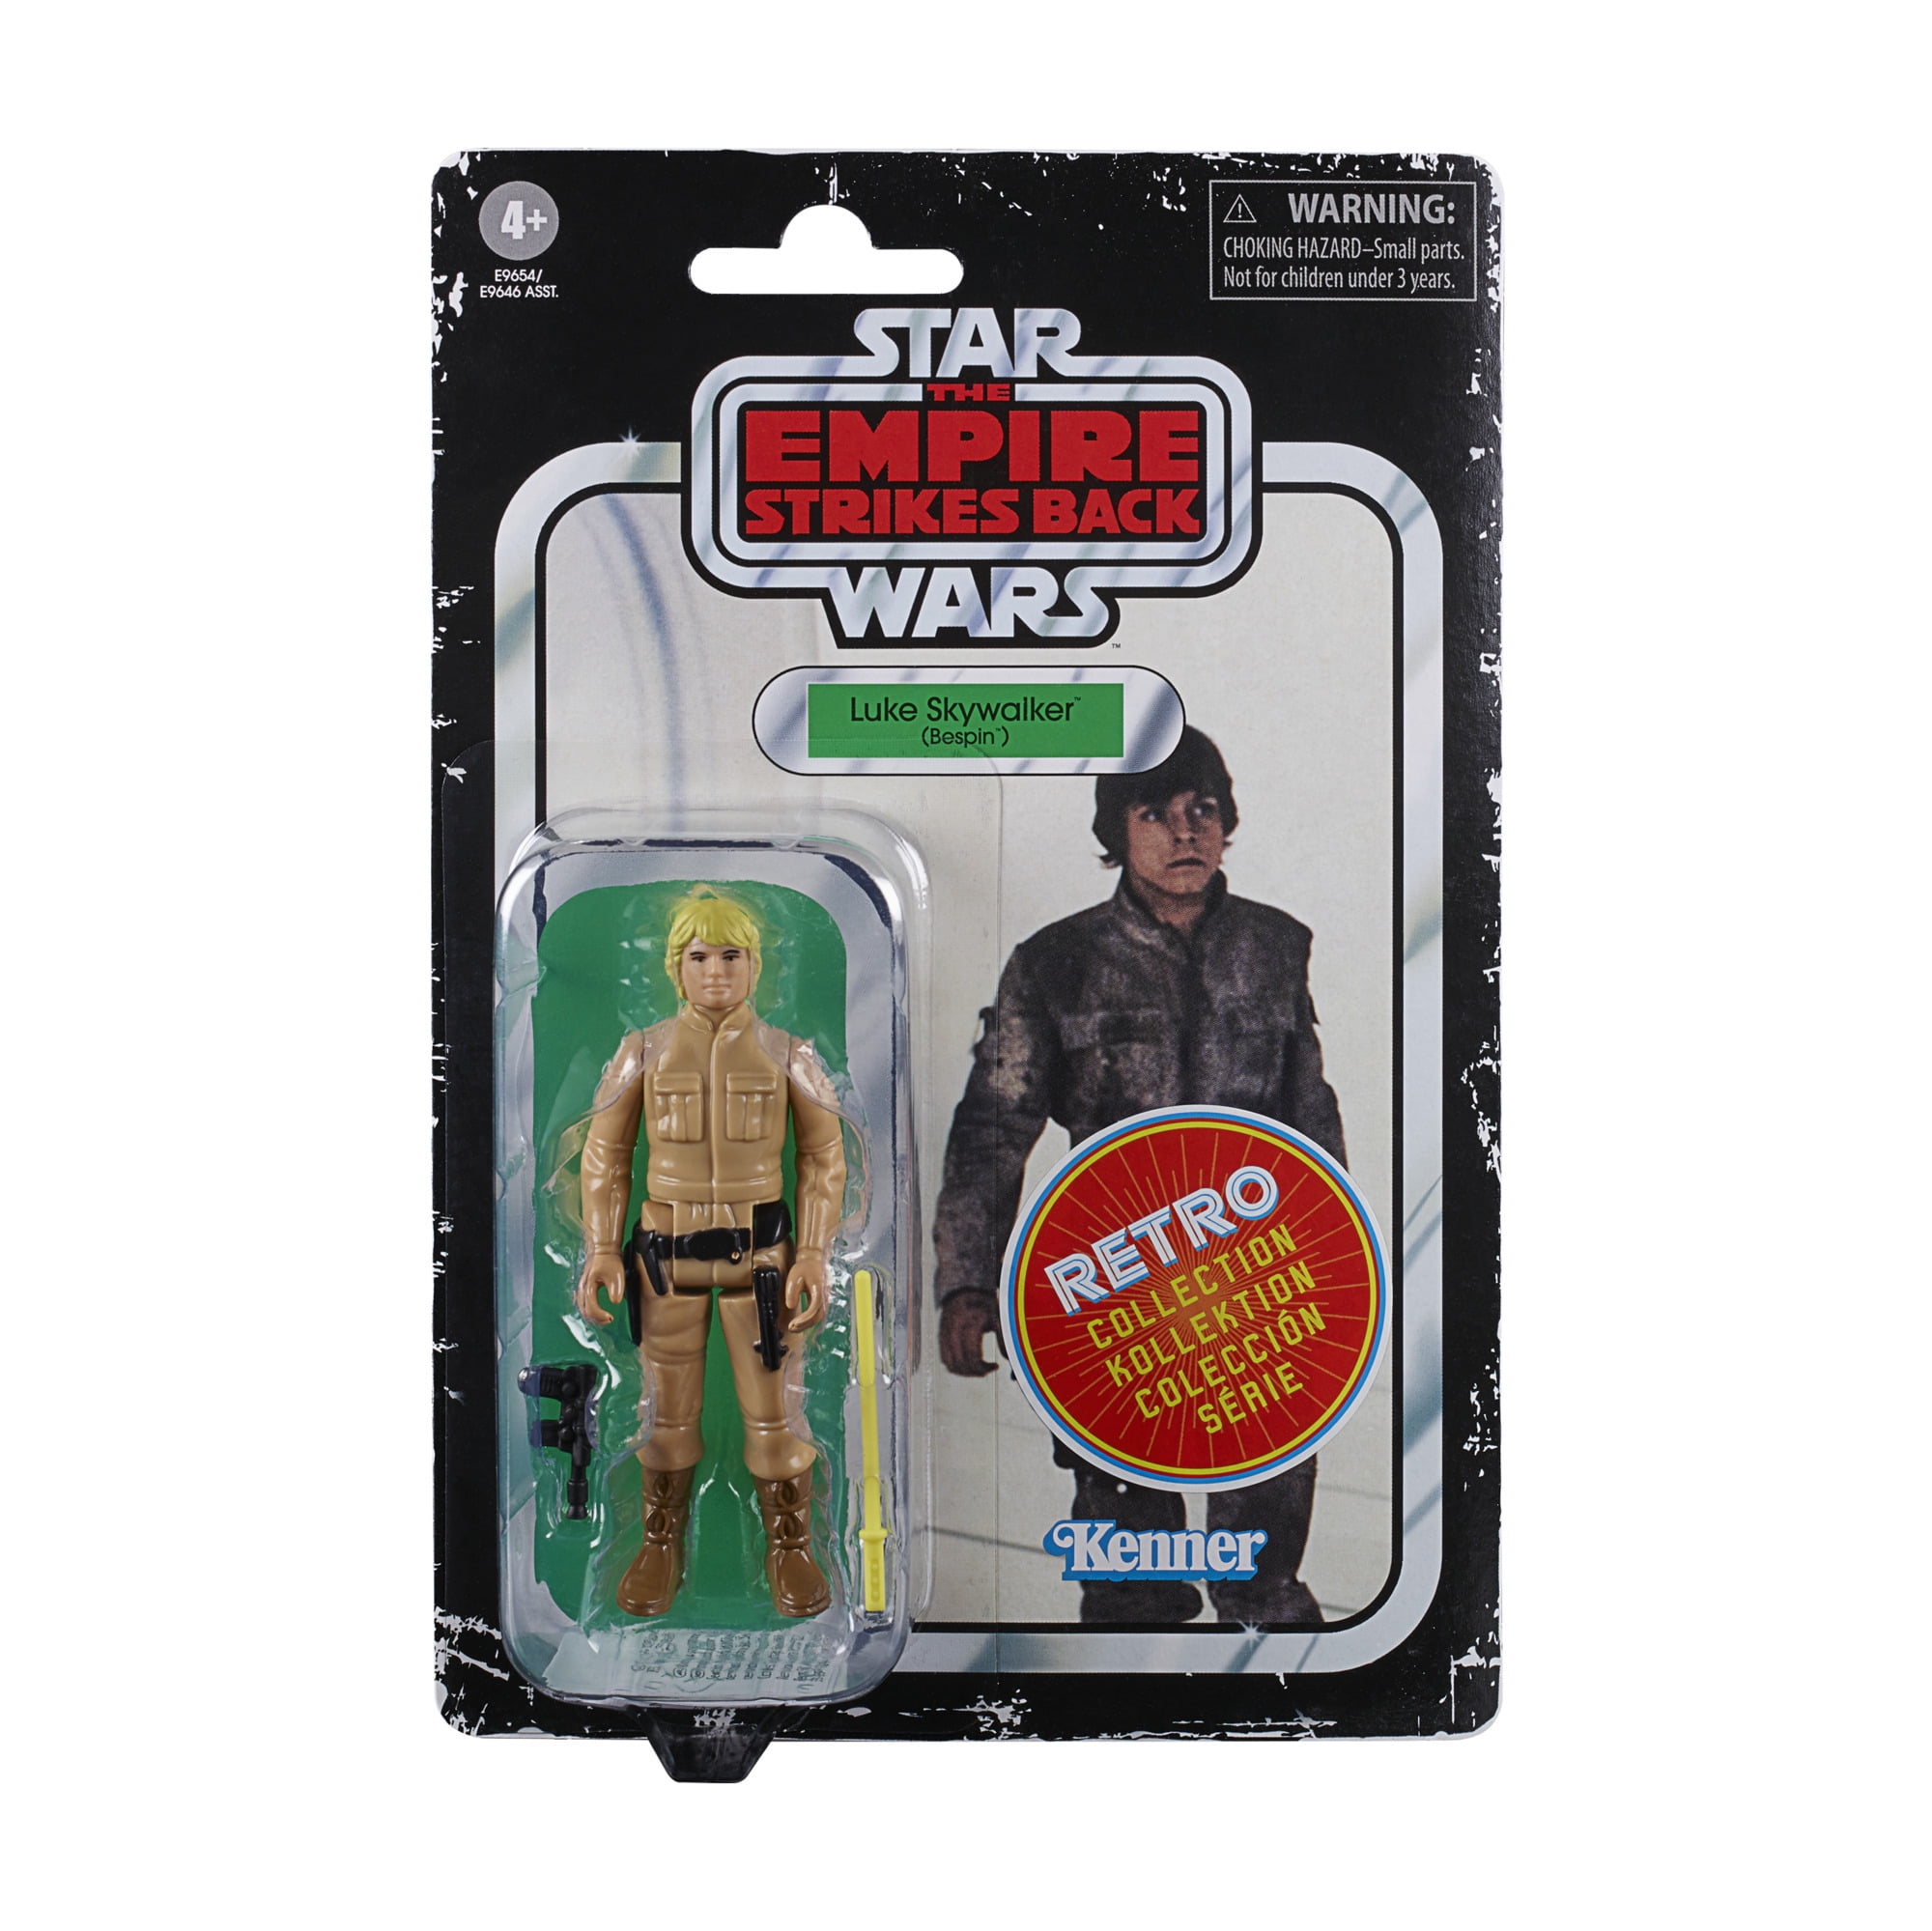 Kids Ages 4 and Up Toy 3.75-inch Scale Star Wars: The Empire Strikes Back Action Figure Bespin Star Wars Retro Collection Luke Skywalker